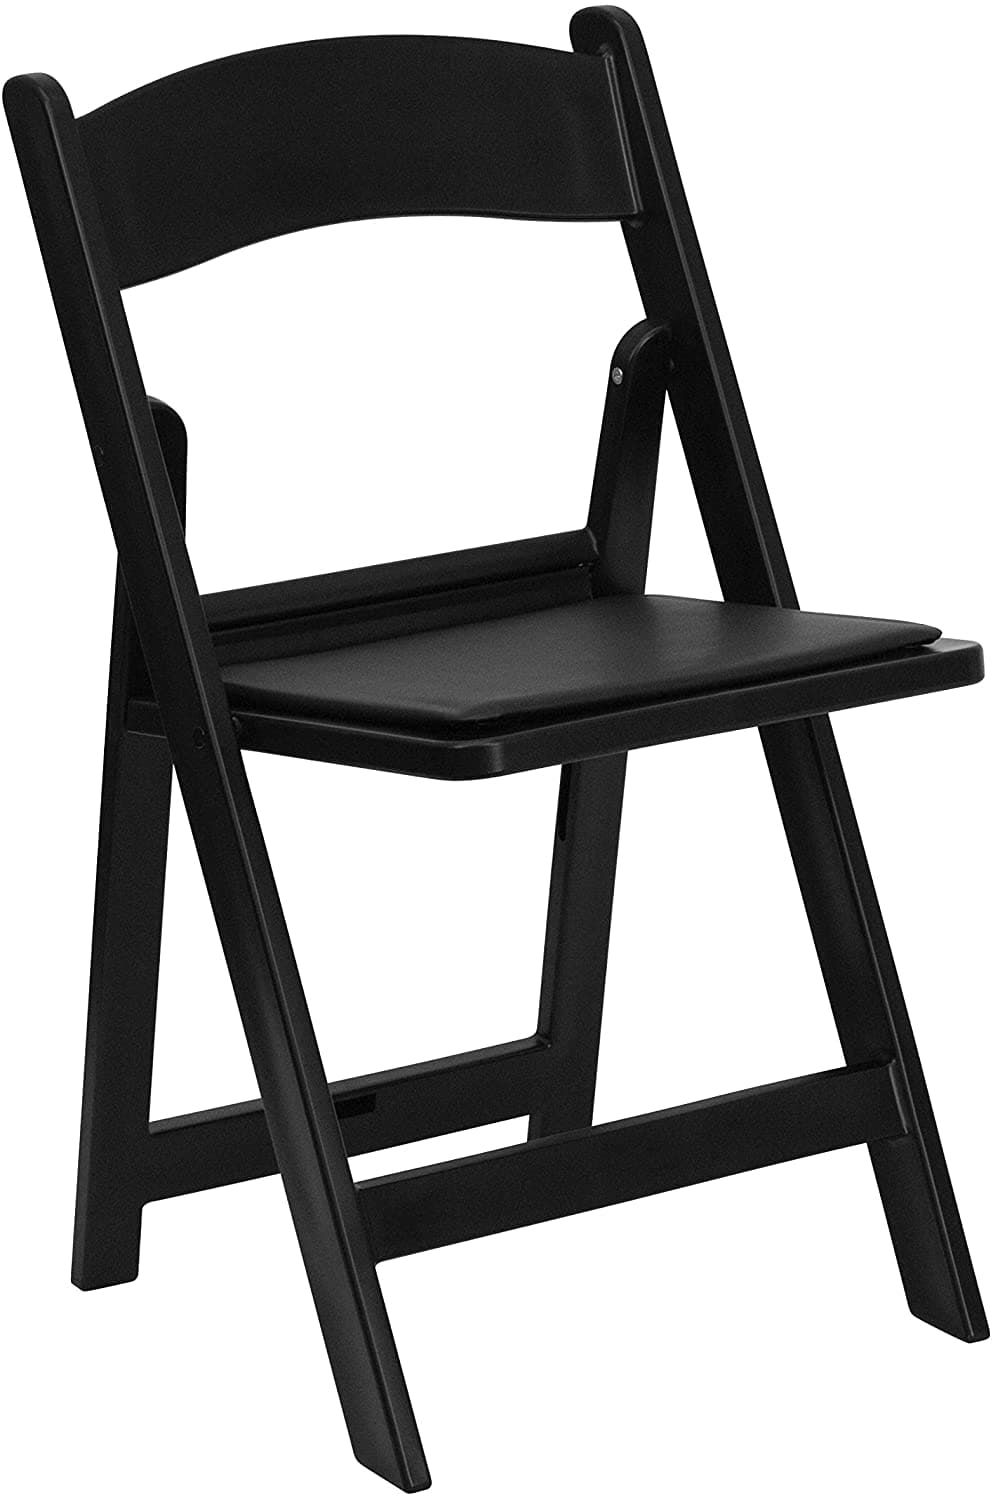 Therasage All Therasage Sauna Chair Upgraded (Black)